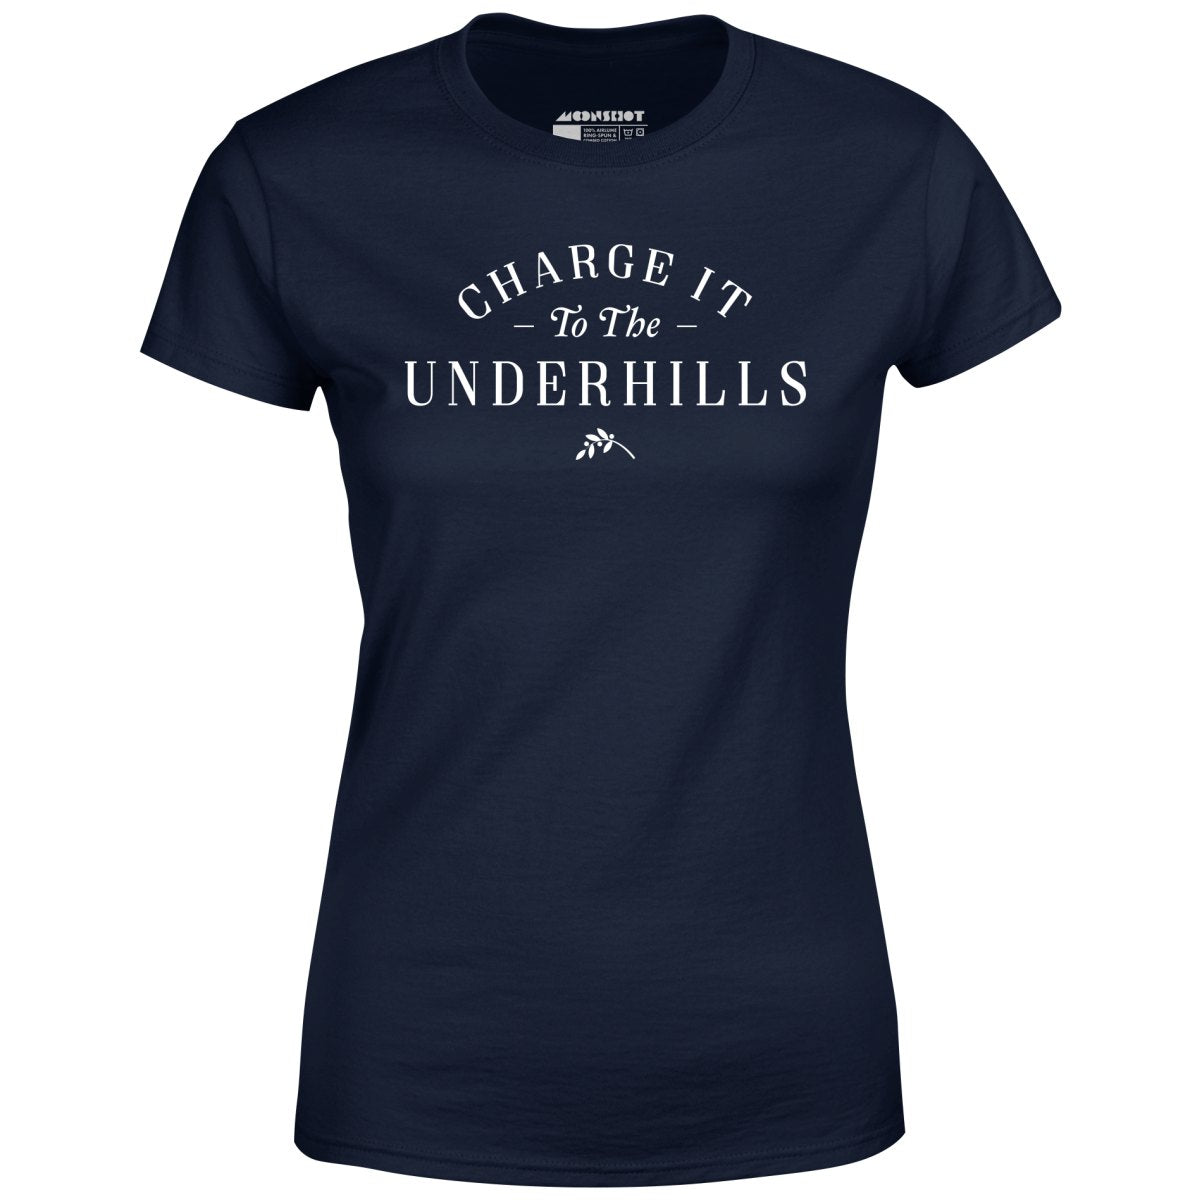 Charge it to the Underhills - Women's T-Shirt